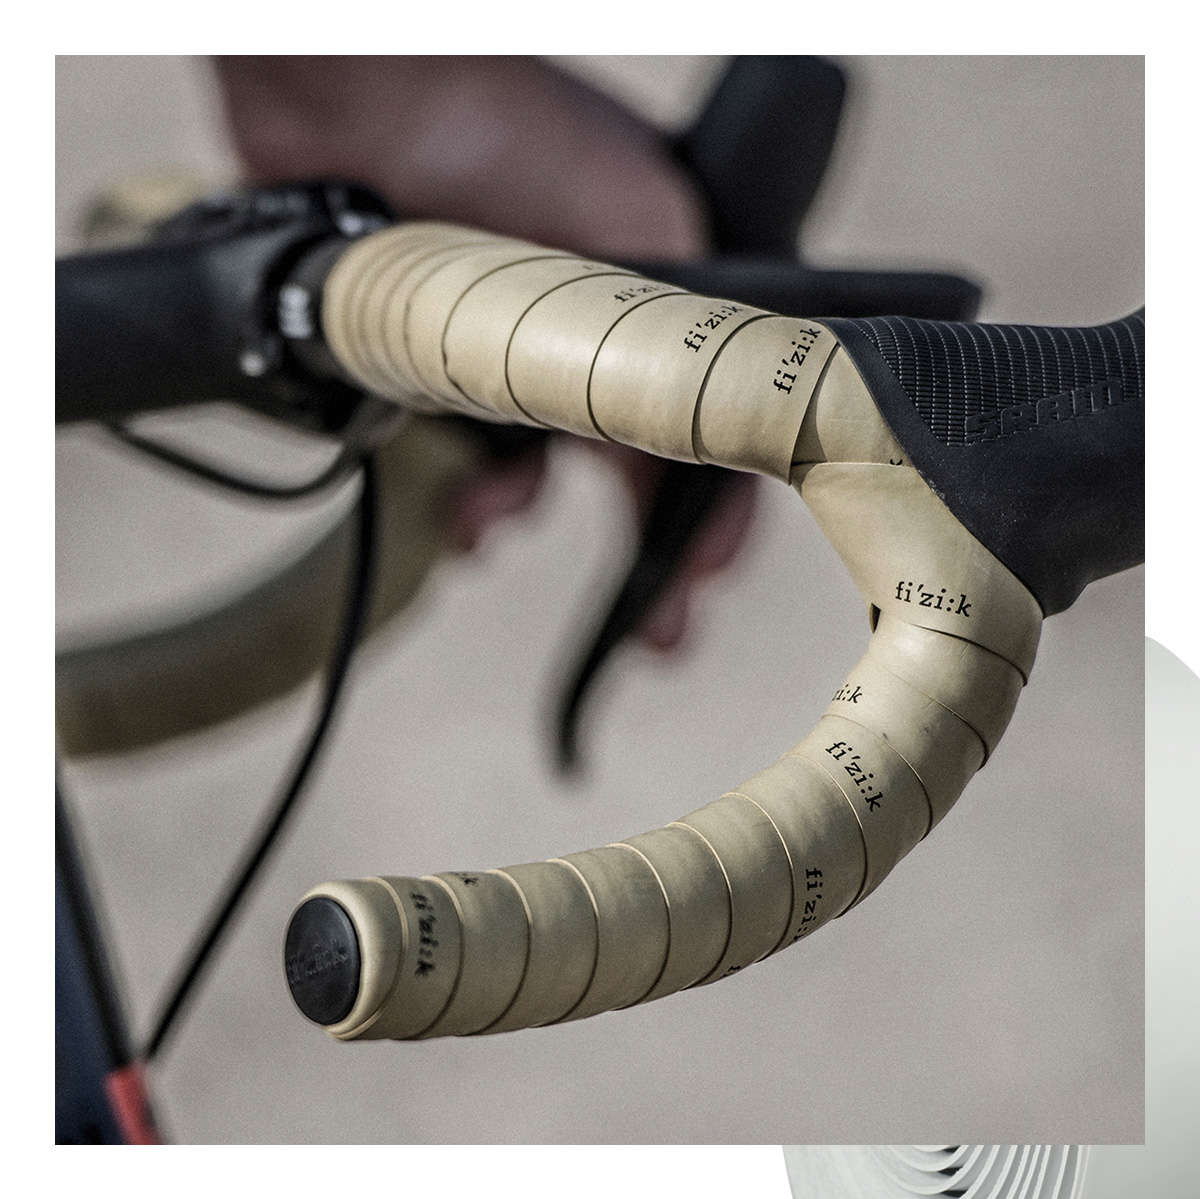 Fizik: Get a grip with the fizik range of bar tape | Milled